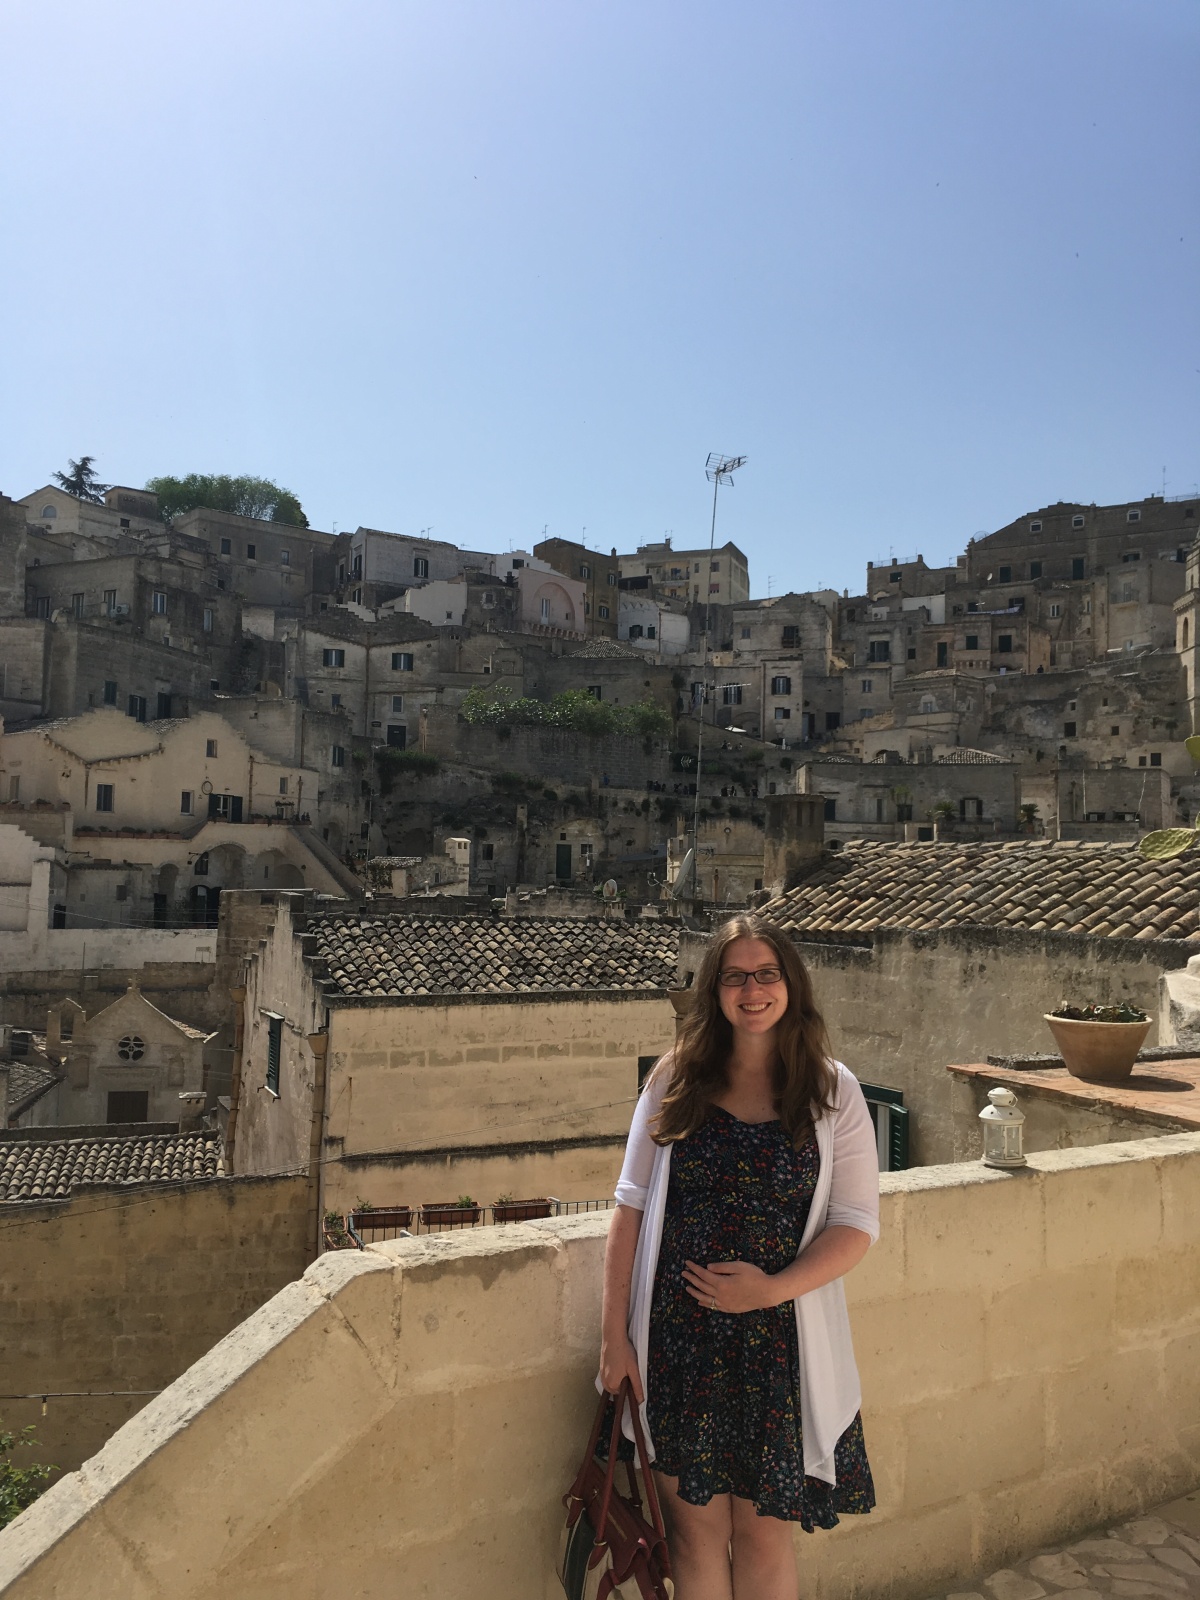 Matera: Where to stay, what to see and do in Matera. We visited on our 10-day Italian babymoon.